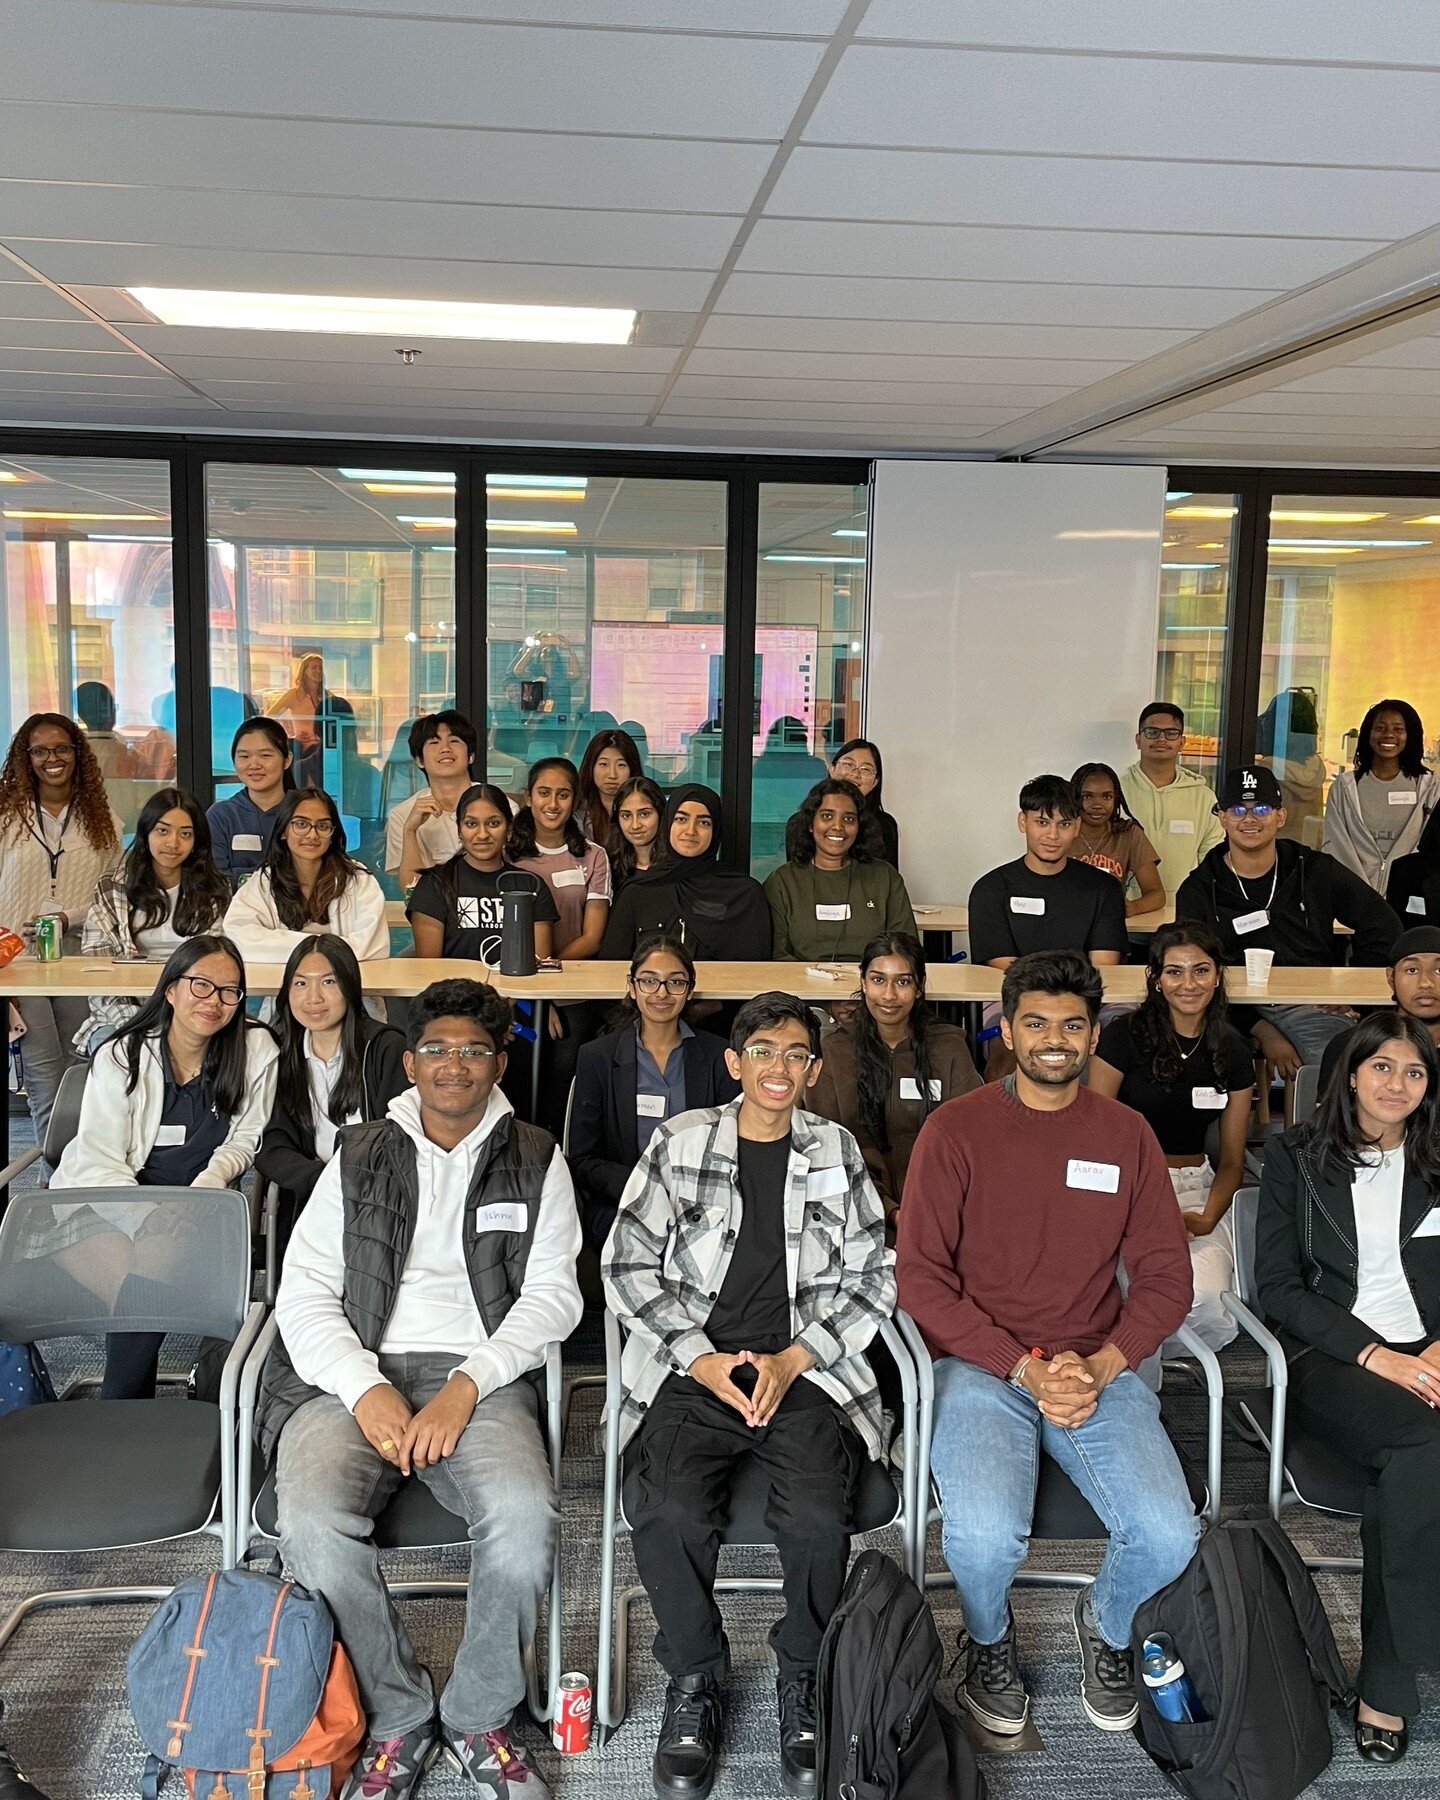 We had a great kickoff to our 3rd year of Inspiring Work programming last week! IBM hosted 45 students + volunteers at their downtown Toronto office. A huge thank you to our hosts.

Students got to meet those in the entire 2023-24 cohort and in their